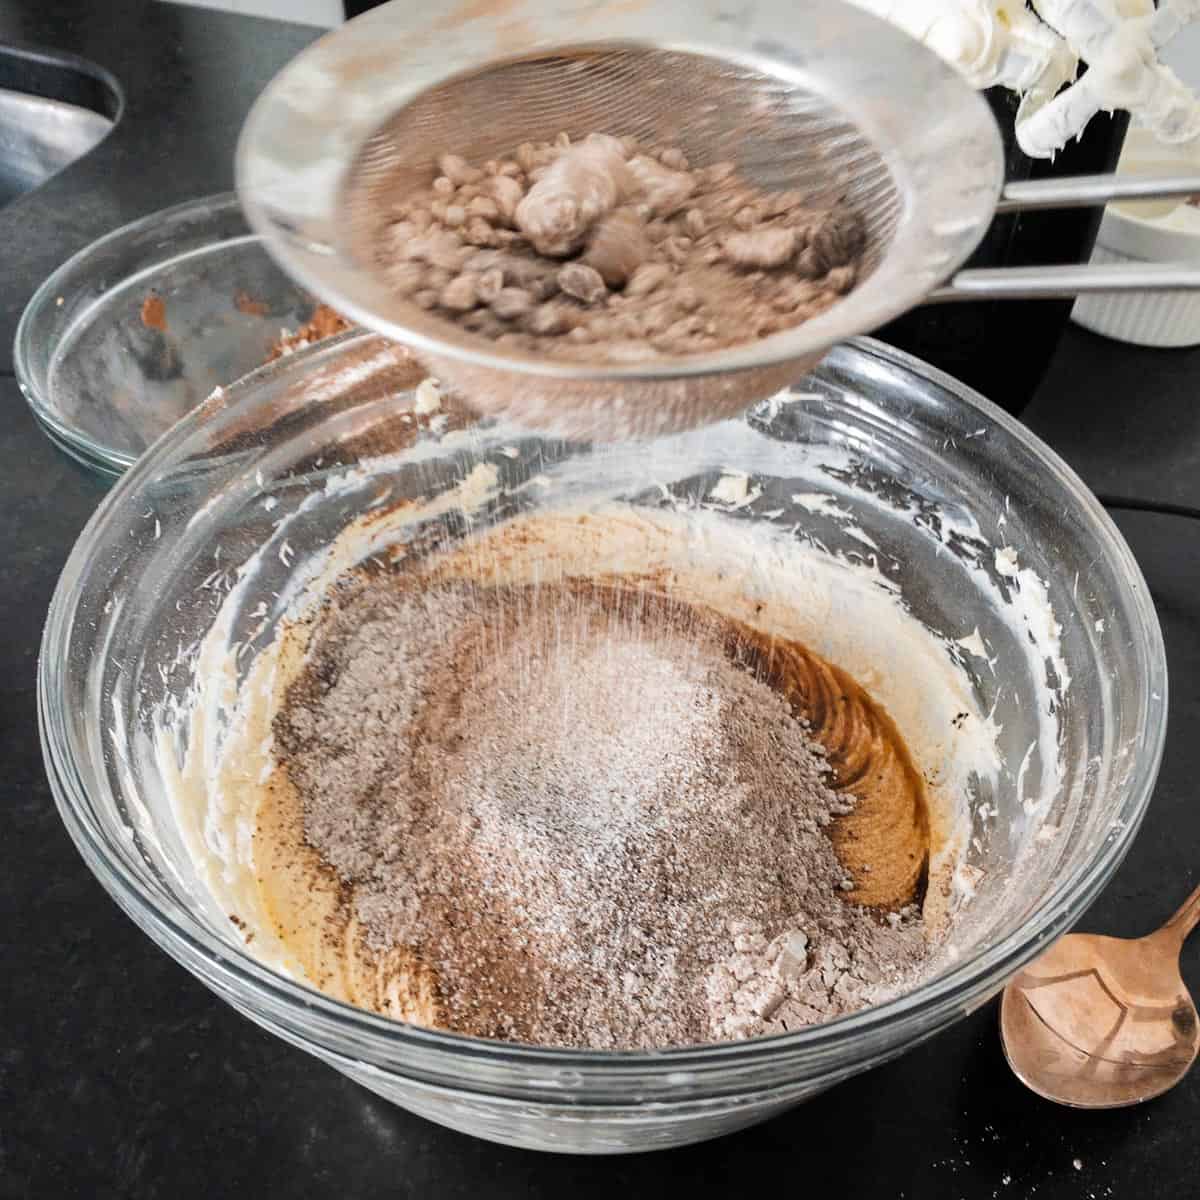 Sifting powdered sugar and cocoa powders into a bowl with cream cheese and butter.